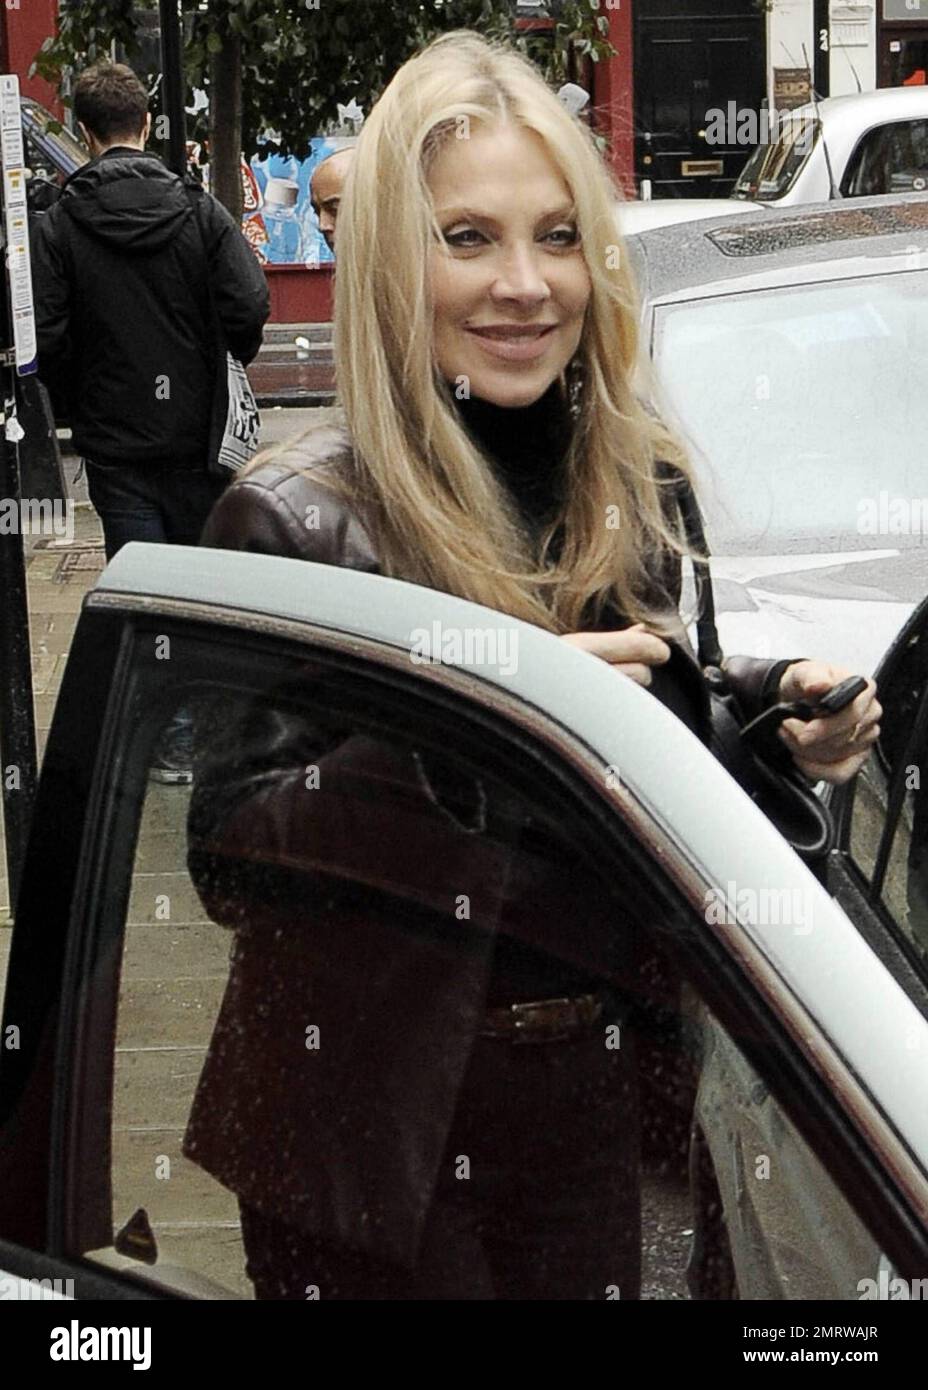 60 Year Old British Pop Singer Lynsey De Paul Smiles For The Camera Before She Gets In To A